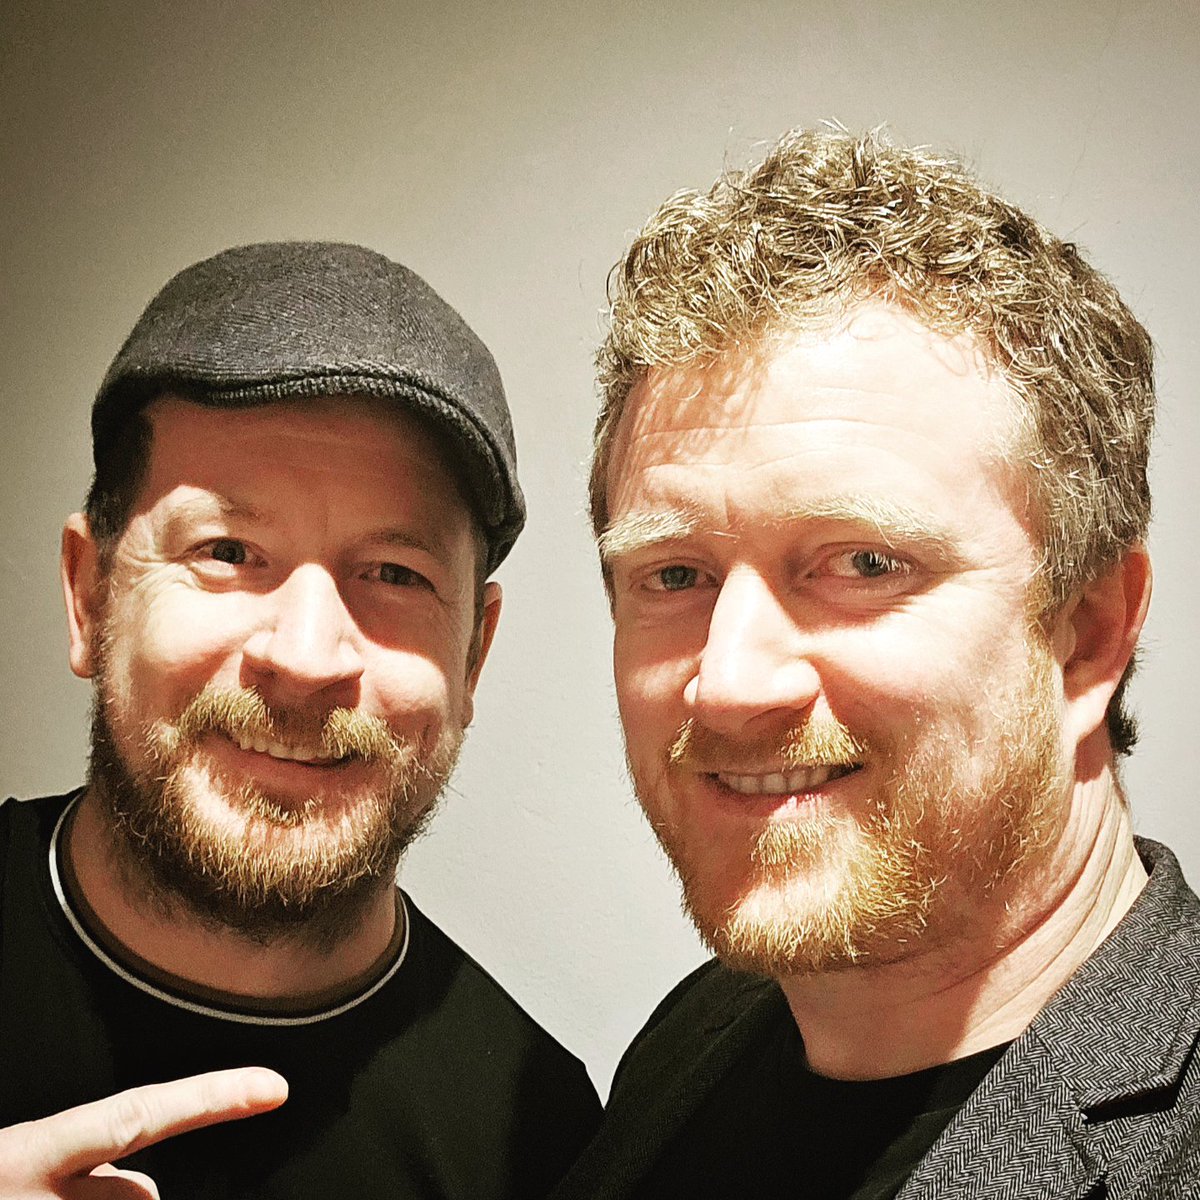 I had a wonderful night with @georgemurphymusic and the @therisingsonsmusic and @seanreganmusic in Castlebar on Saturday night Thanks to all in @tf_castlebar again for everything @webster_mac_neely #padraigjack #georgemurphy #tfroyalhotelandtheatre #castlebar